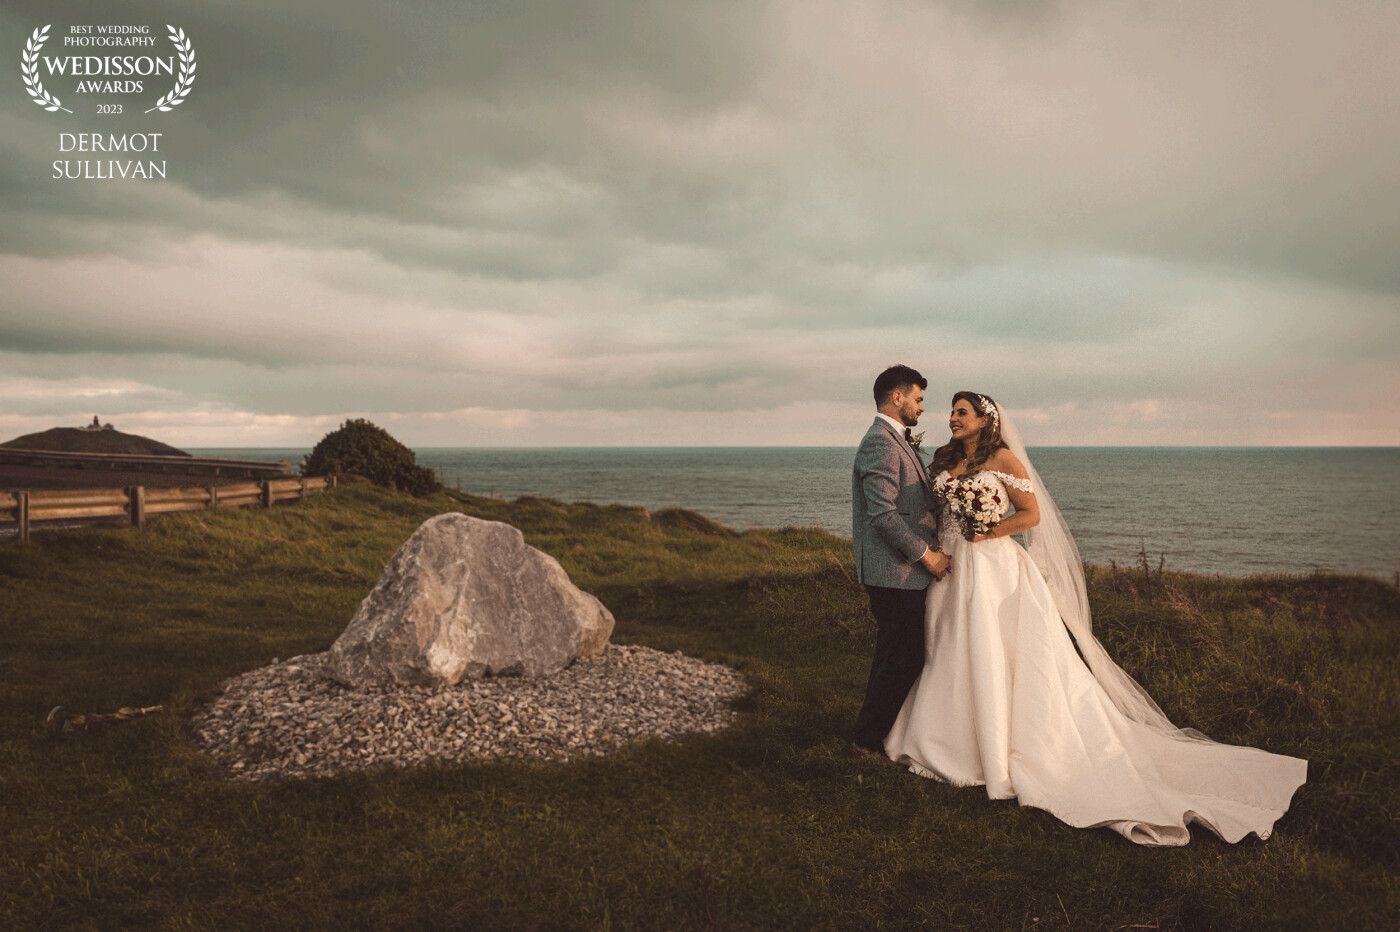 This amazing couple were really into creating great photographs using the seascape of Cork as the background. We went to a clifftop outside the village of Ballycotton  and climbed over some obstacles to get to our location. Their wedding was in early December, so the sun was setting around 4pm, which gave us the beautiful light. I shot it without flash or any additional lighting and edited it in Lr.